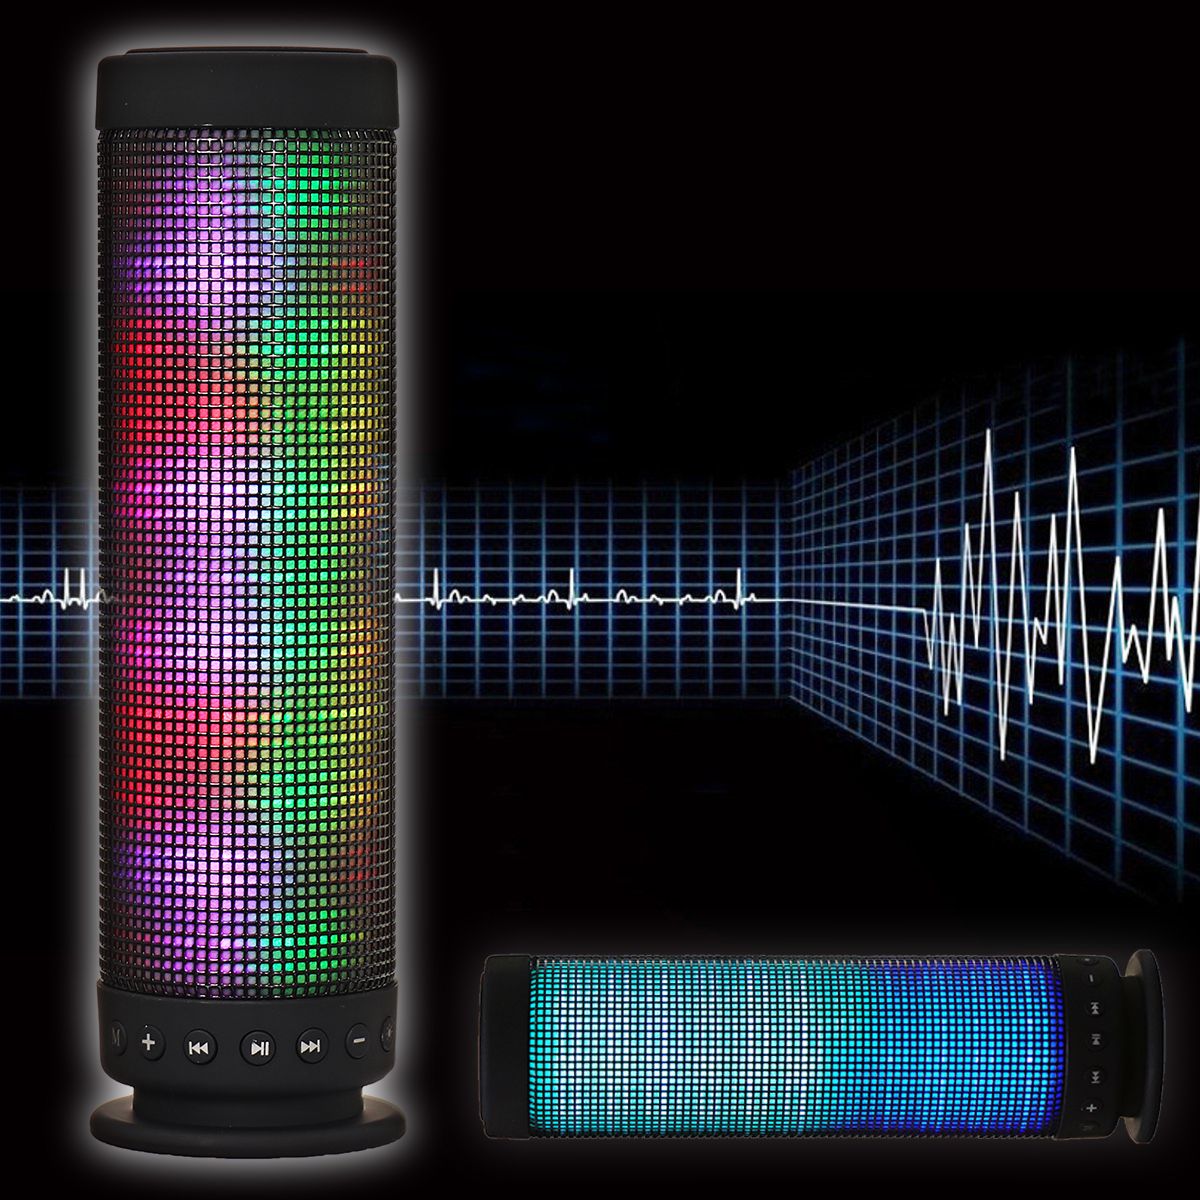 Portable-3D-Pulse-Wireless-bluetooth-Speaker-LED-lights-Colorful-Music-TF-Card-35mm-Aux-Handsfree-St-1419764